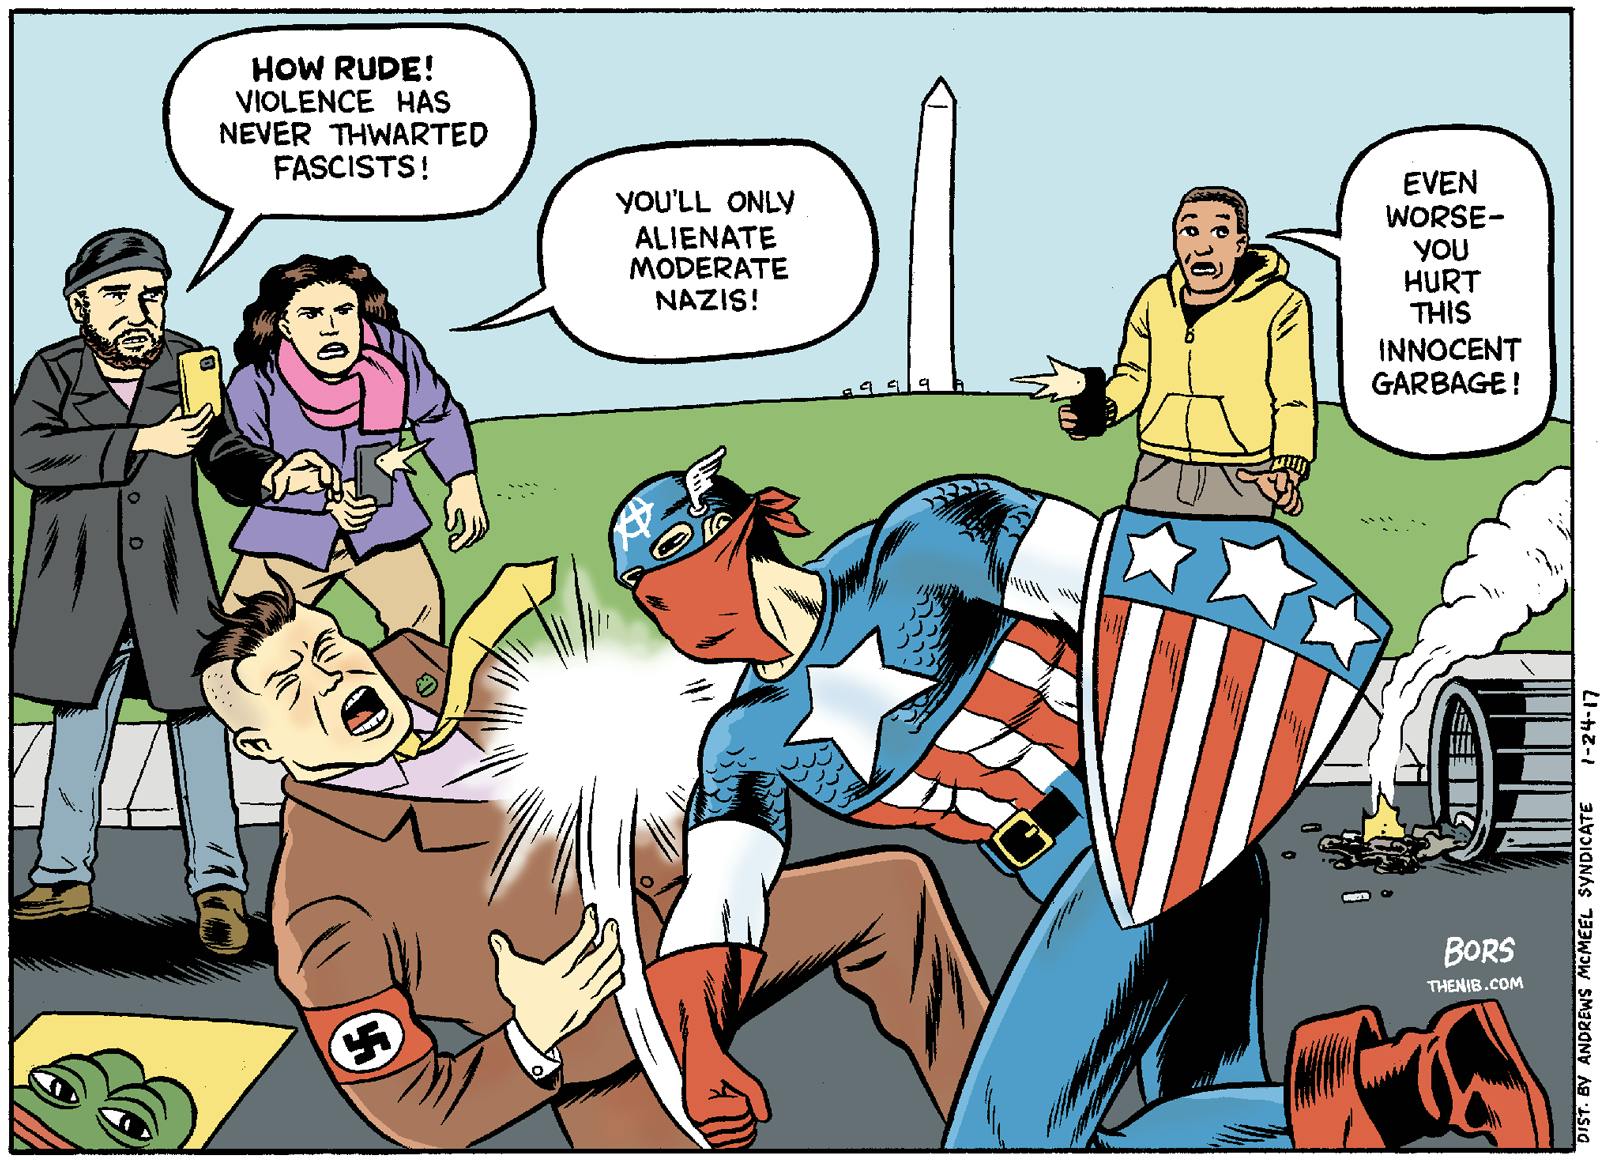 Comic by Matt Bors, who articulates many of my friends position well. 